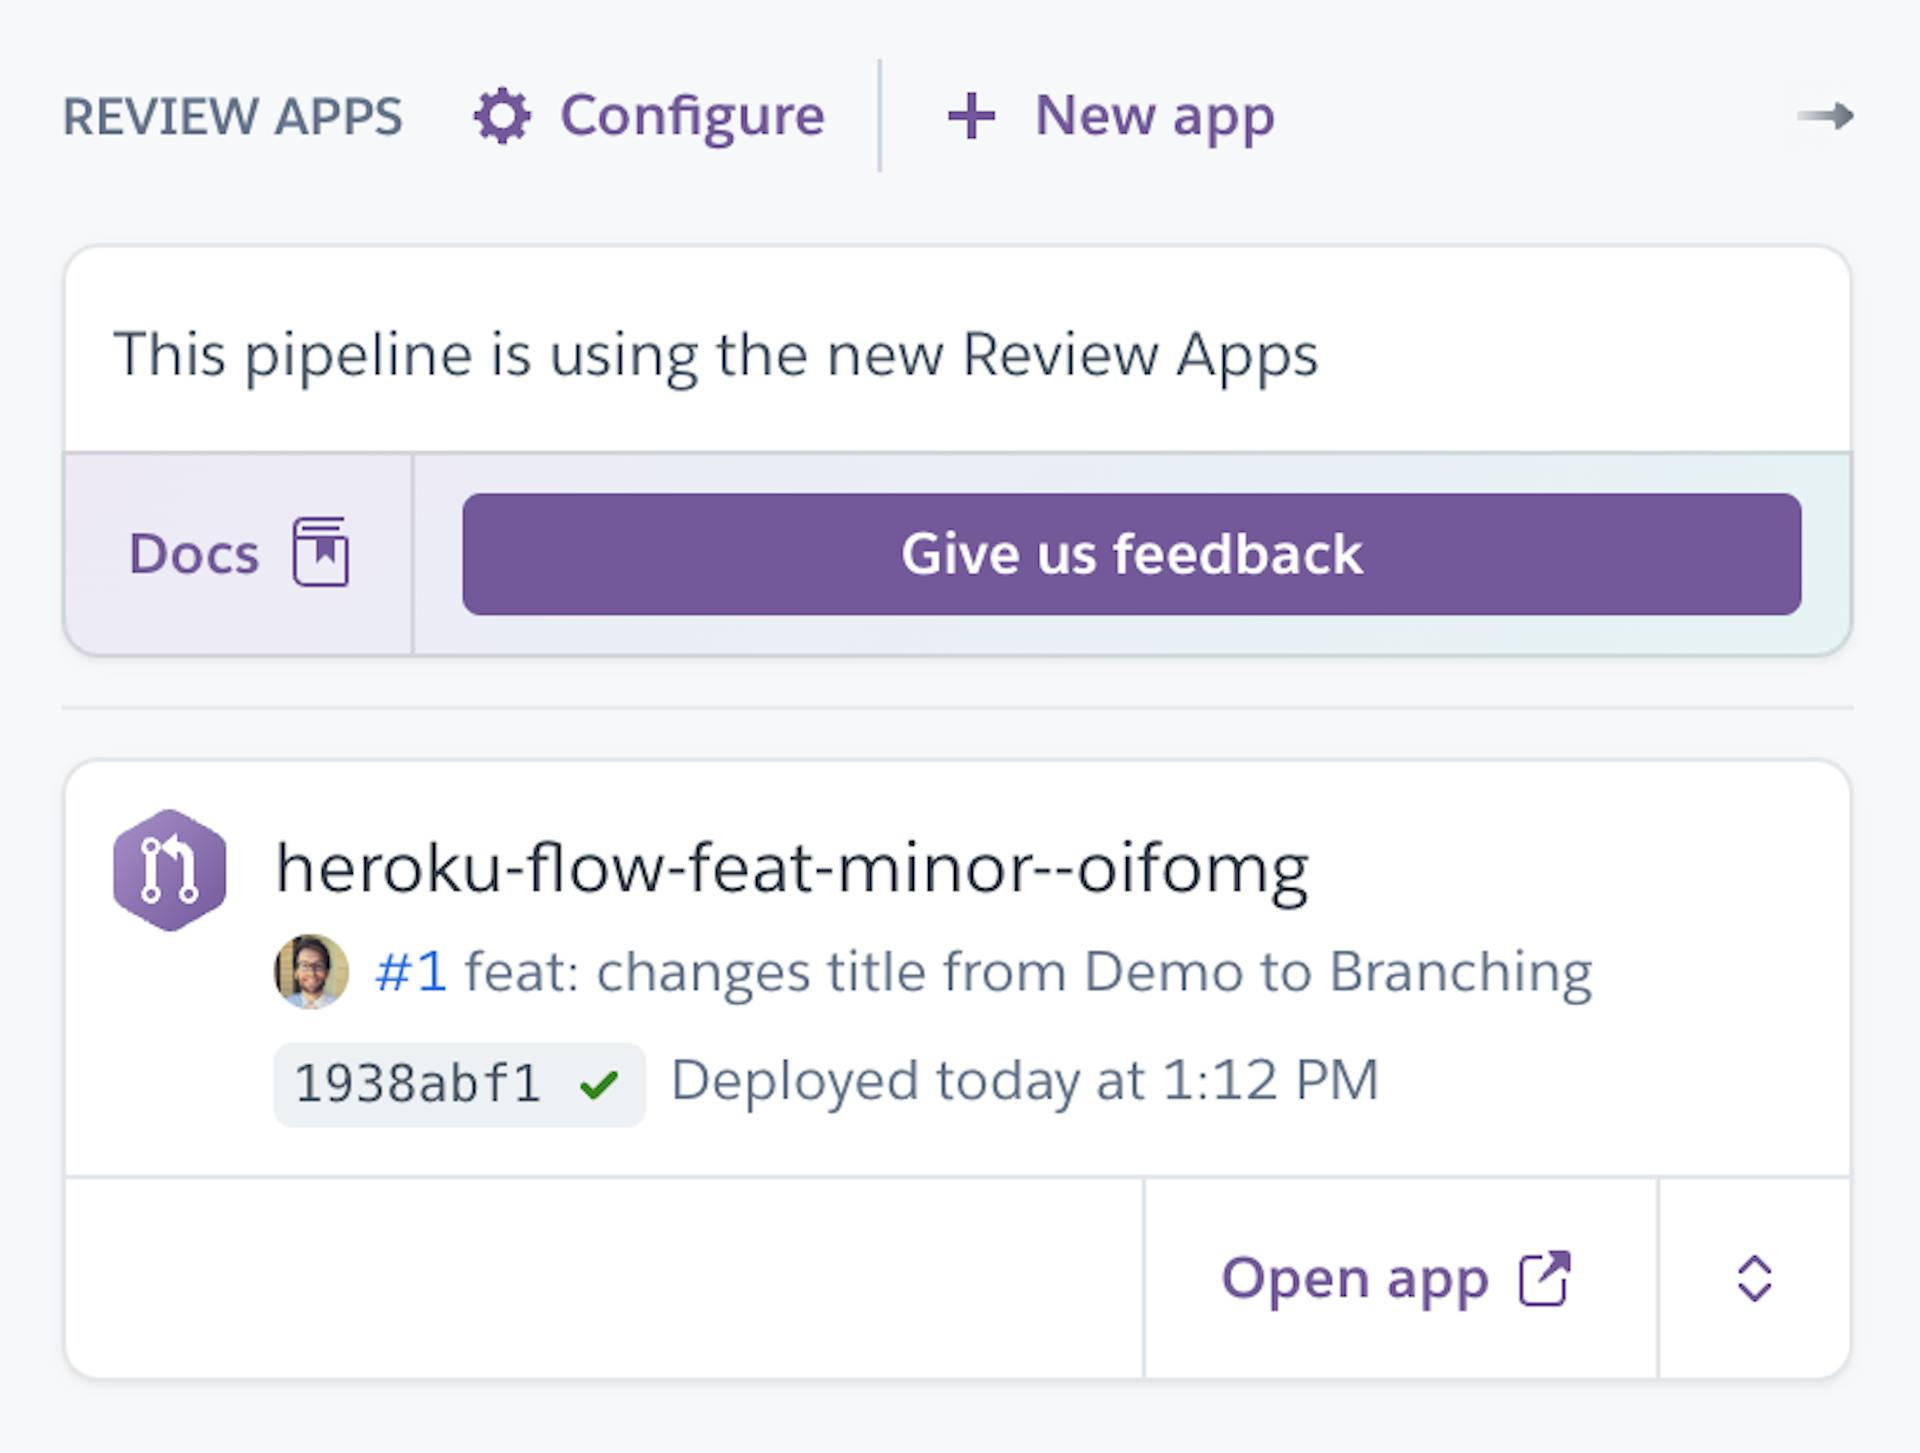 Review app found in the Heroku pipeline